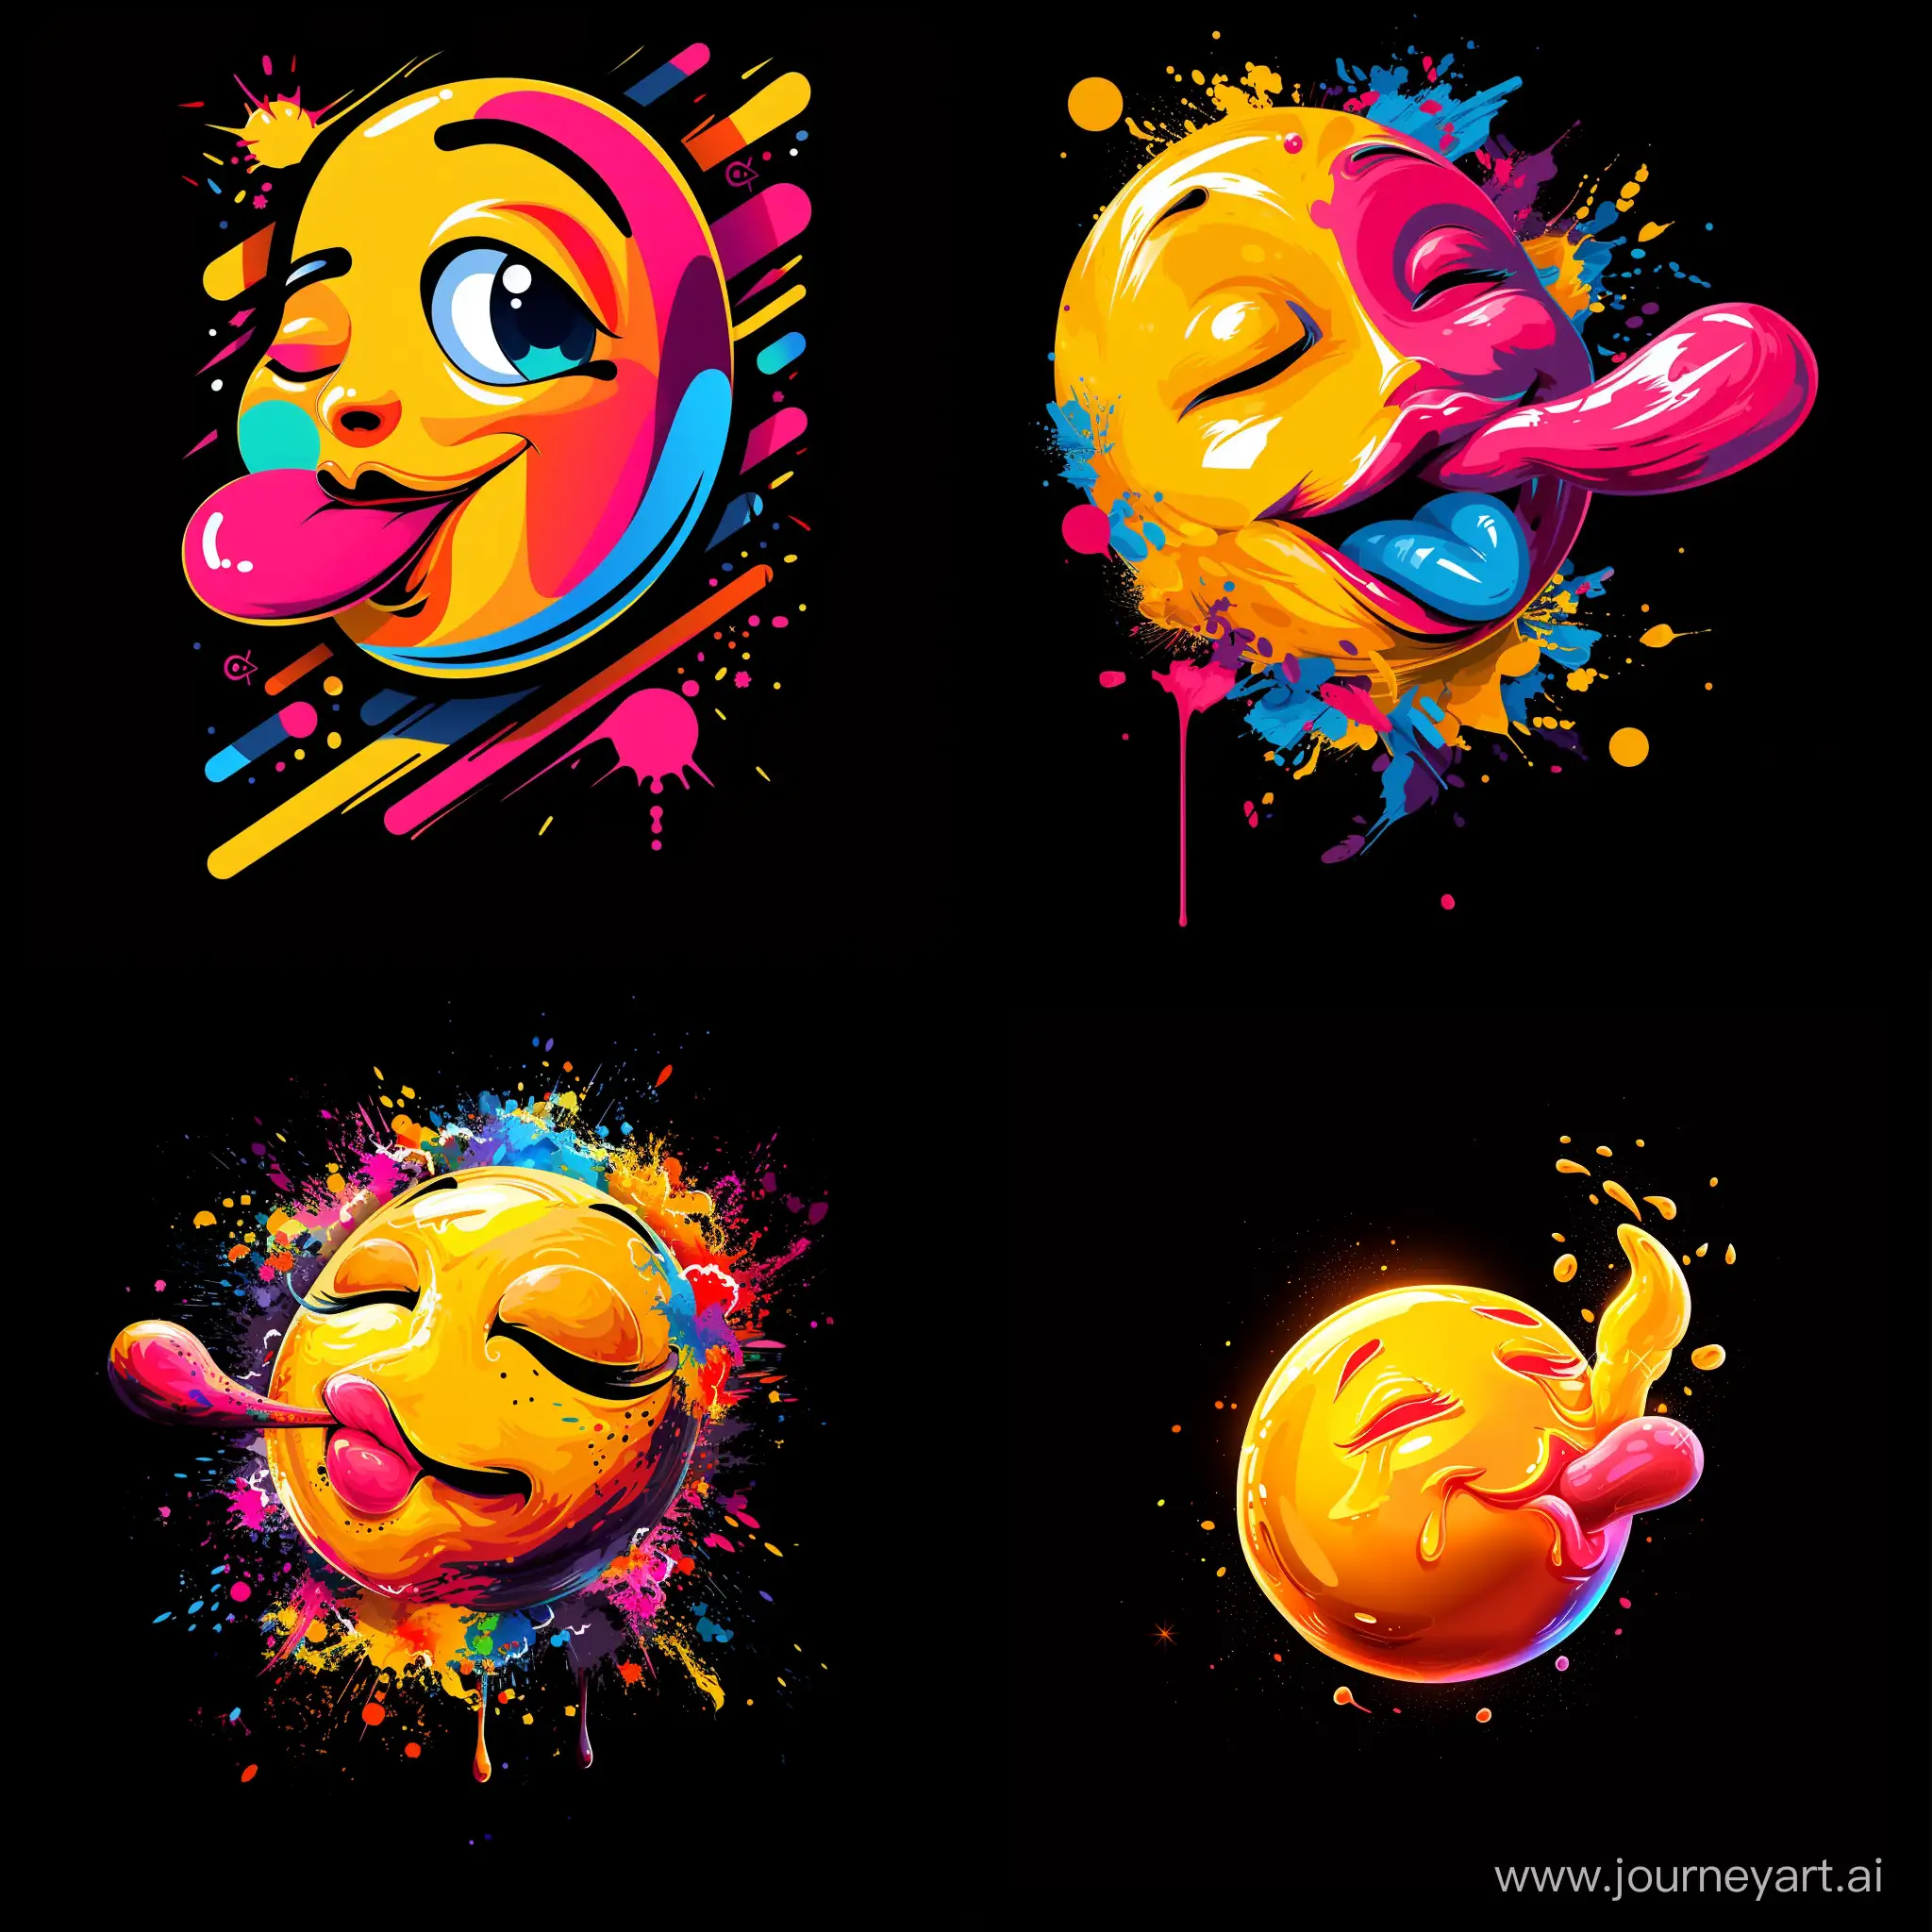 face blowing a kiss Emoji , tailored for t-shirt art. The design combines 3D vector art with bright, bold, colorful elements against a black background,